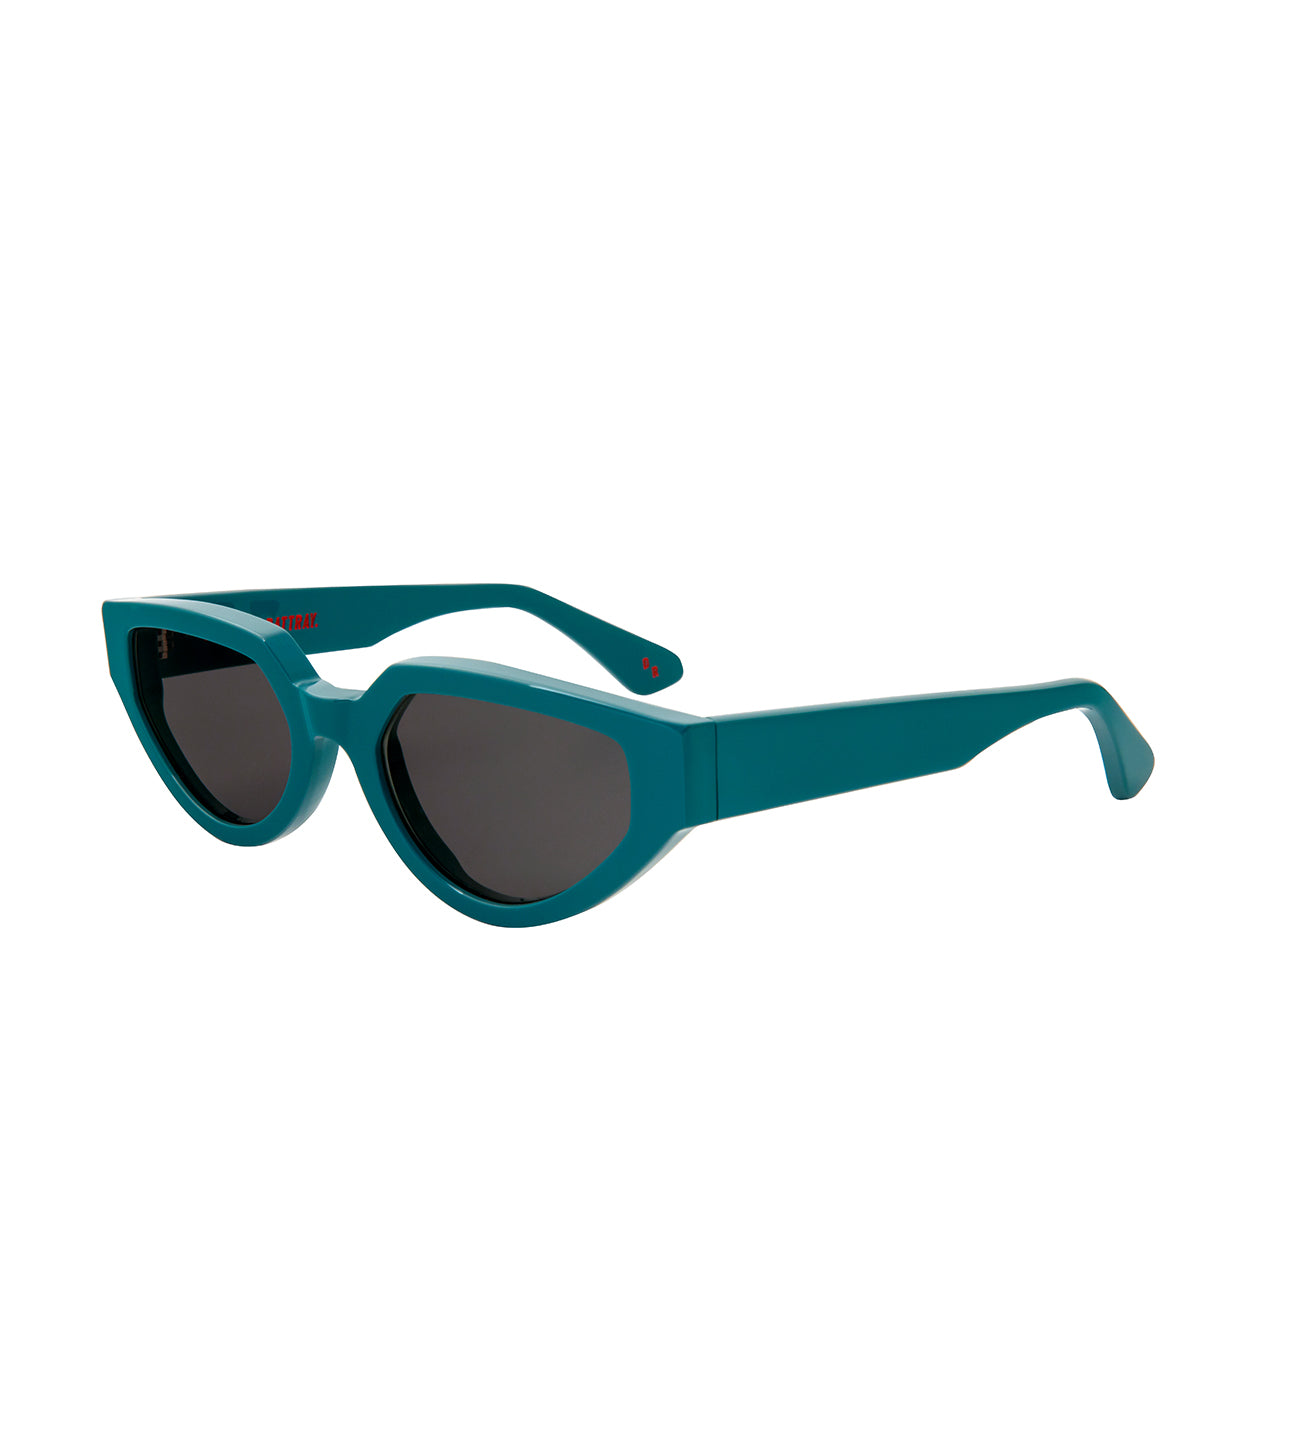 Vada Teal Sunglasses by Danielle Rattray 